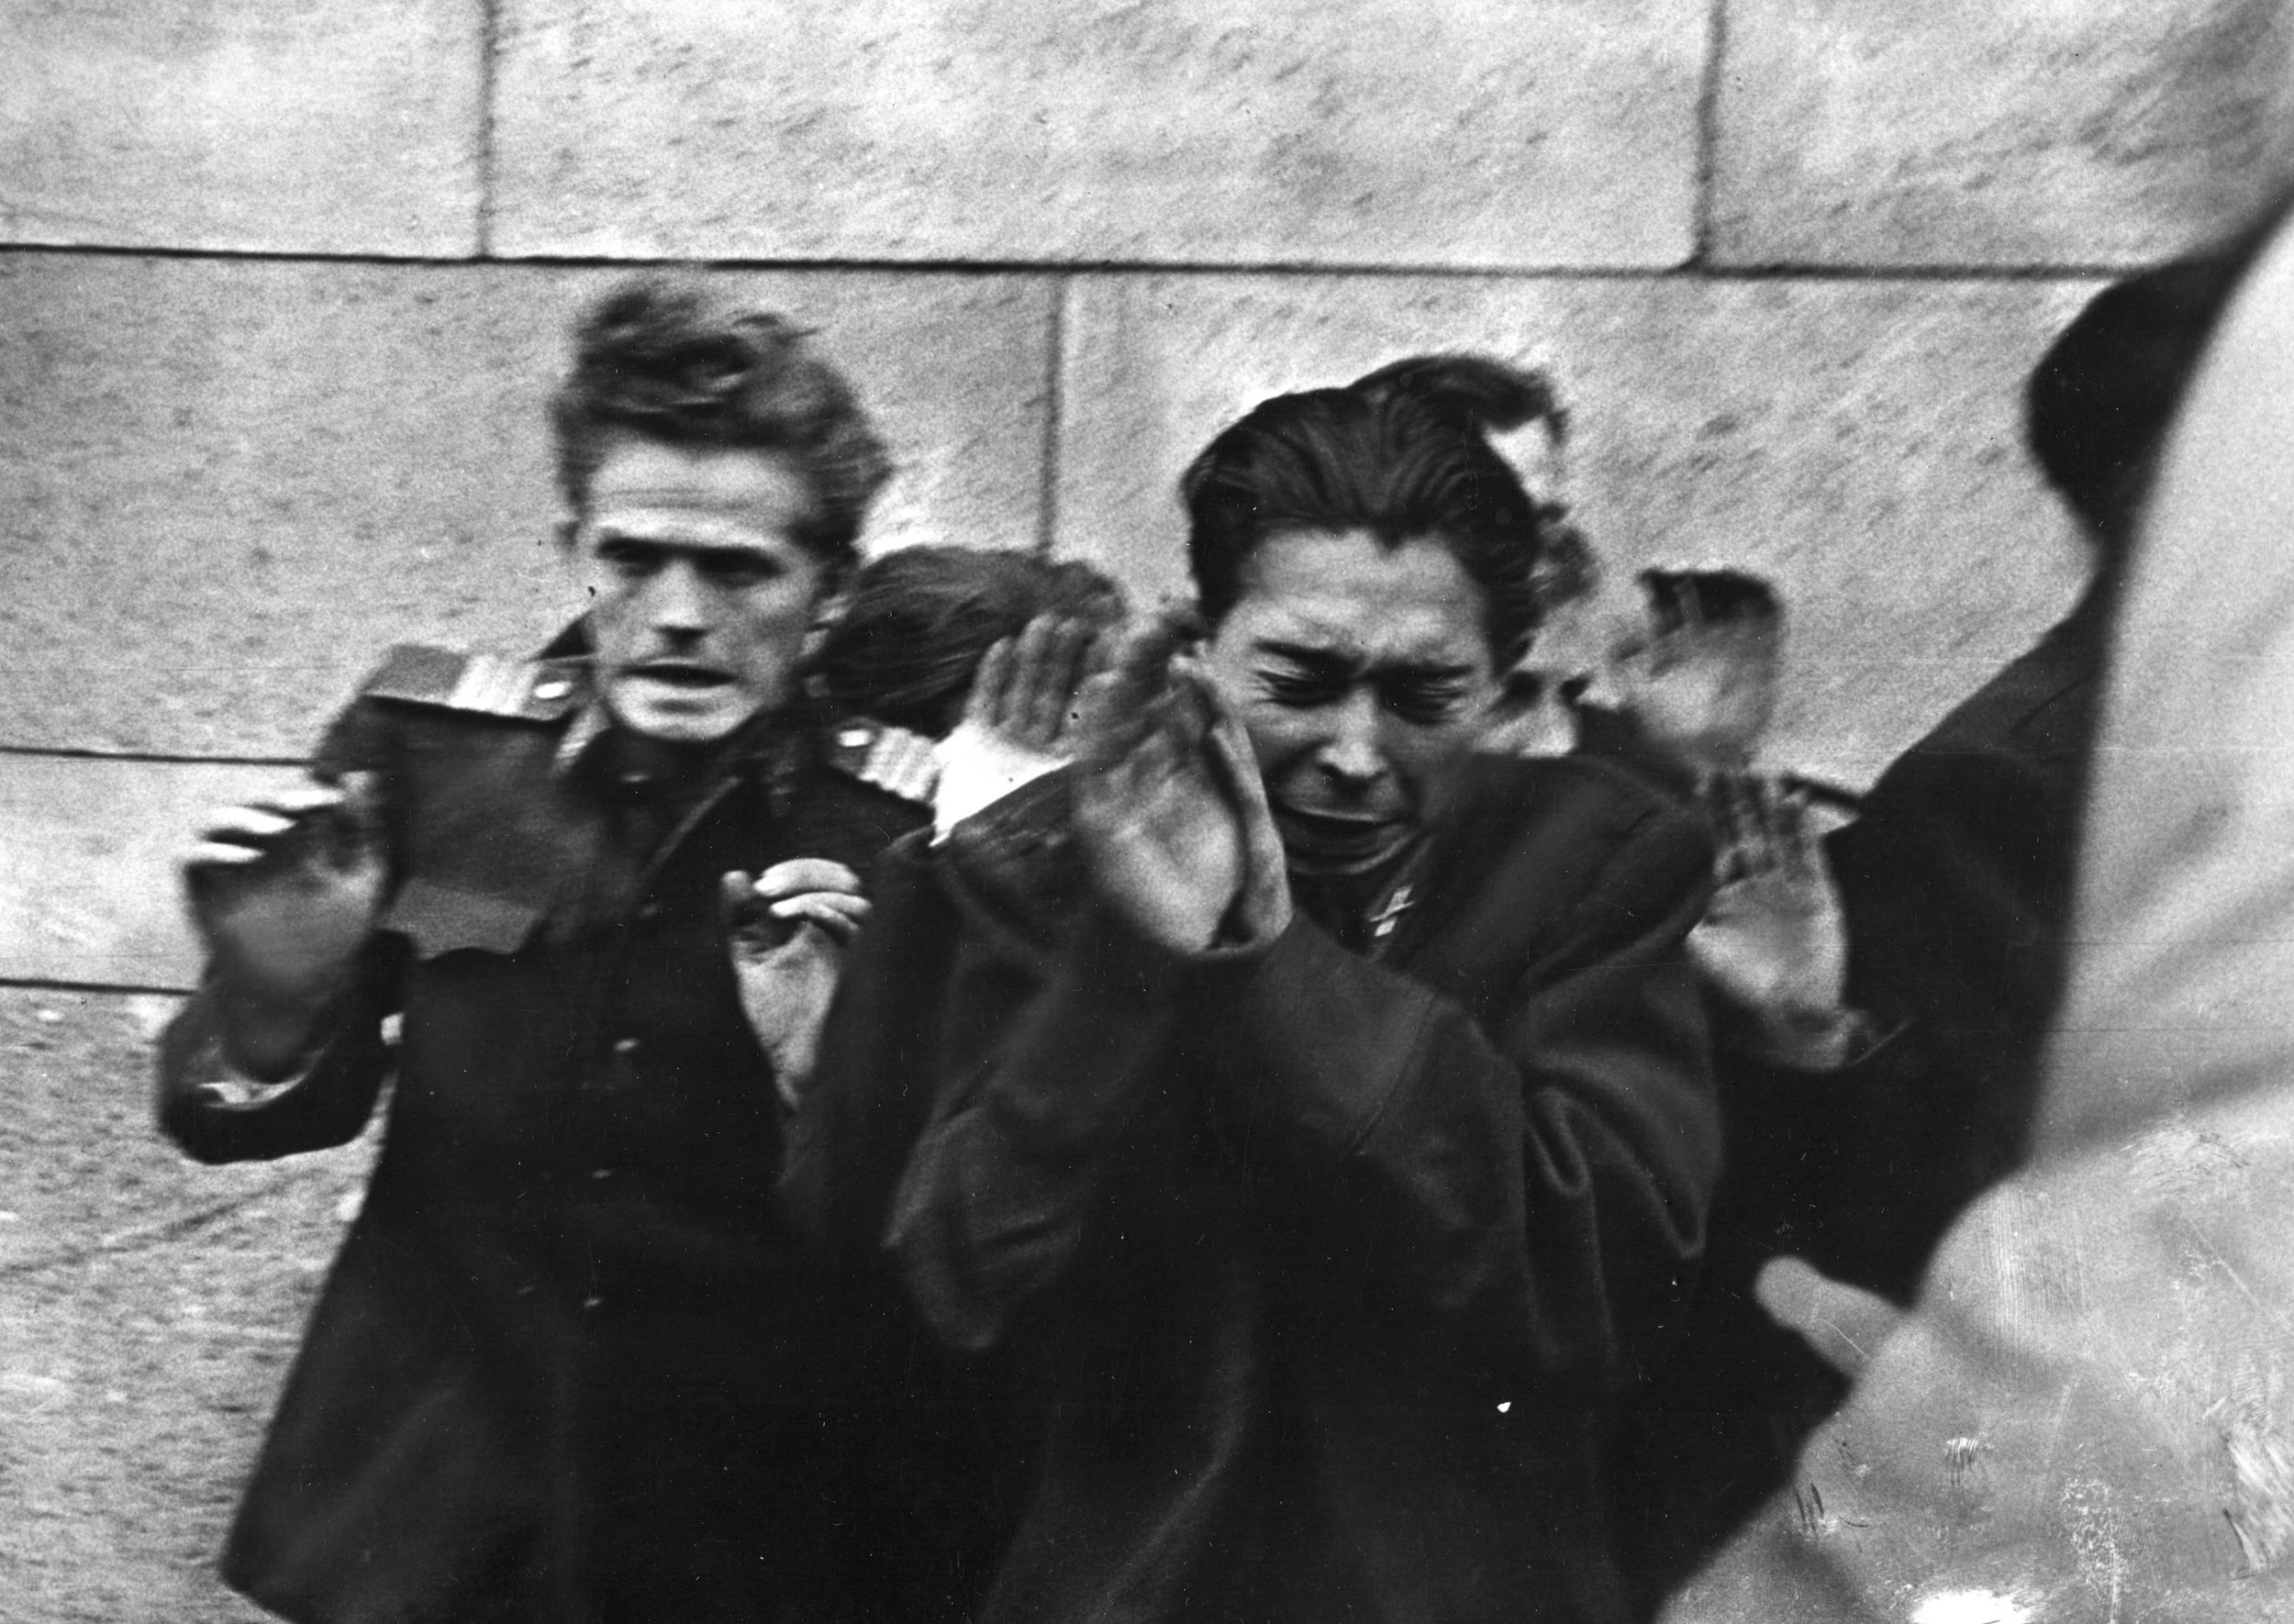 AVH secret policemen, hands raised to protect themselves, are gunned down by Hungarian rebels. 